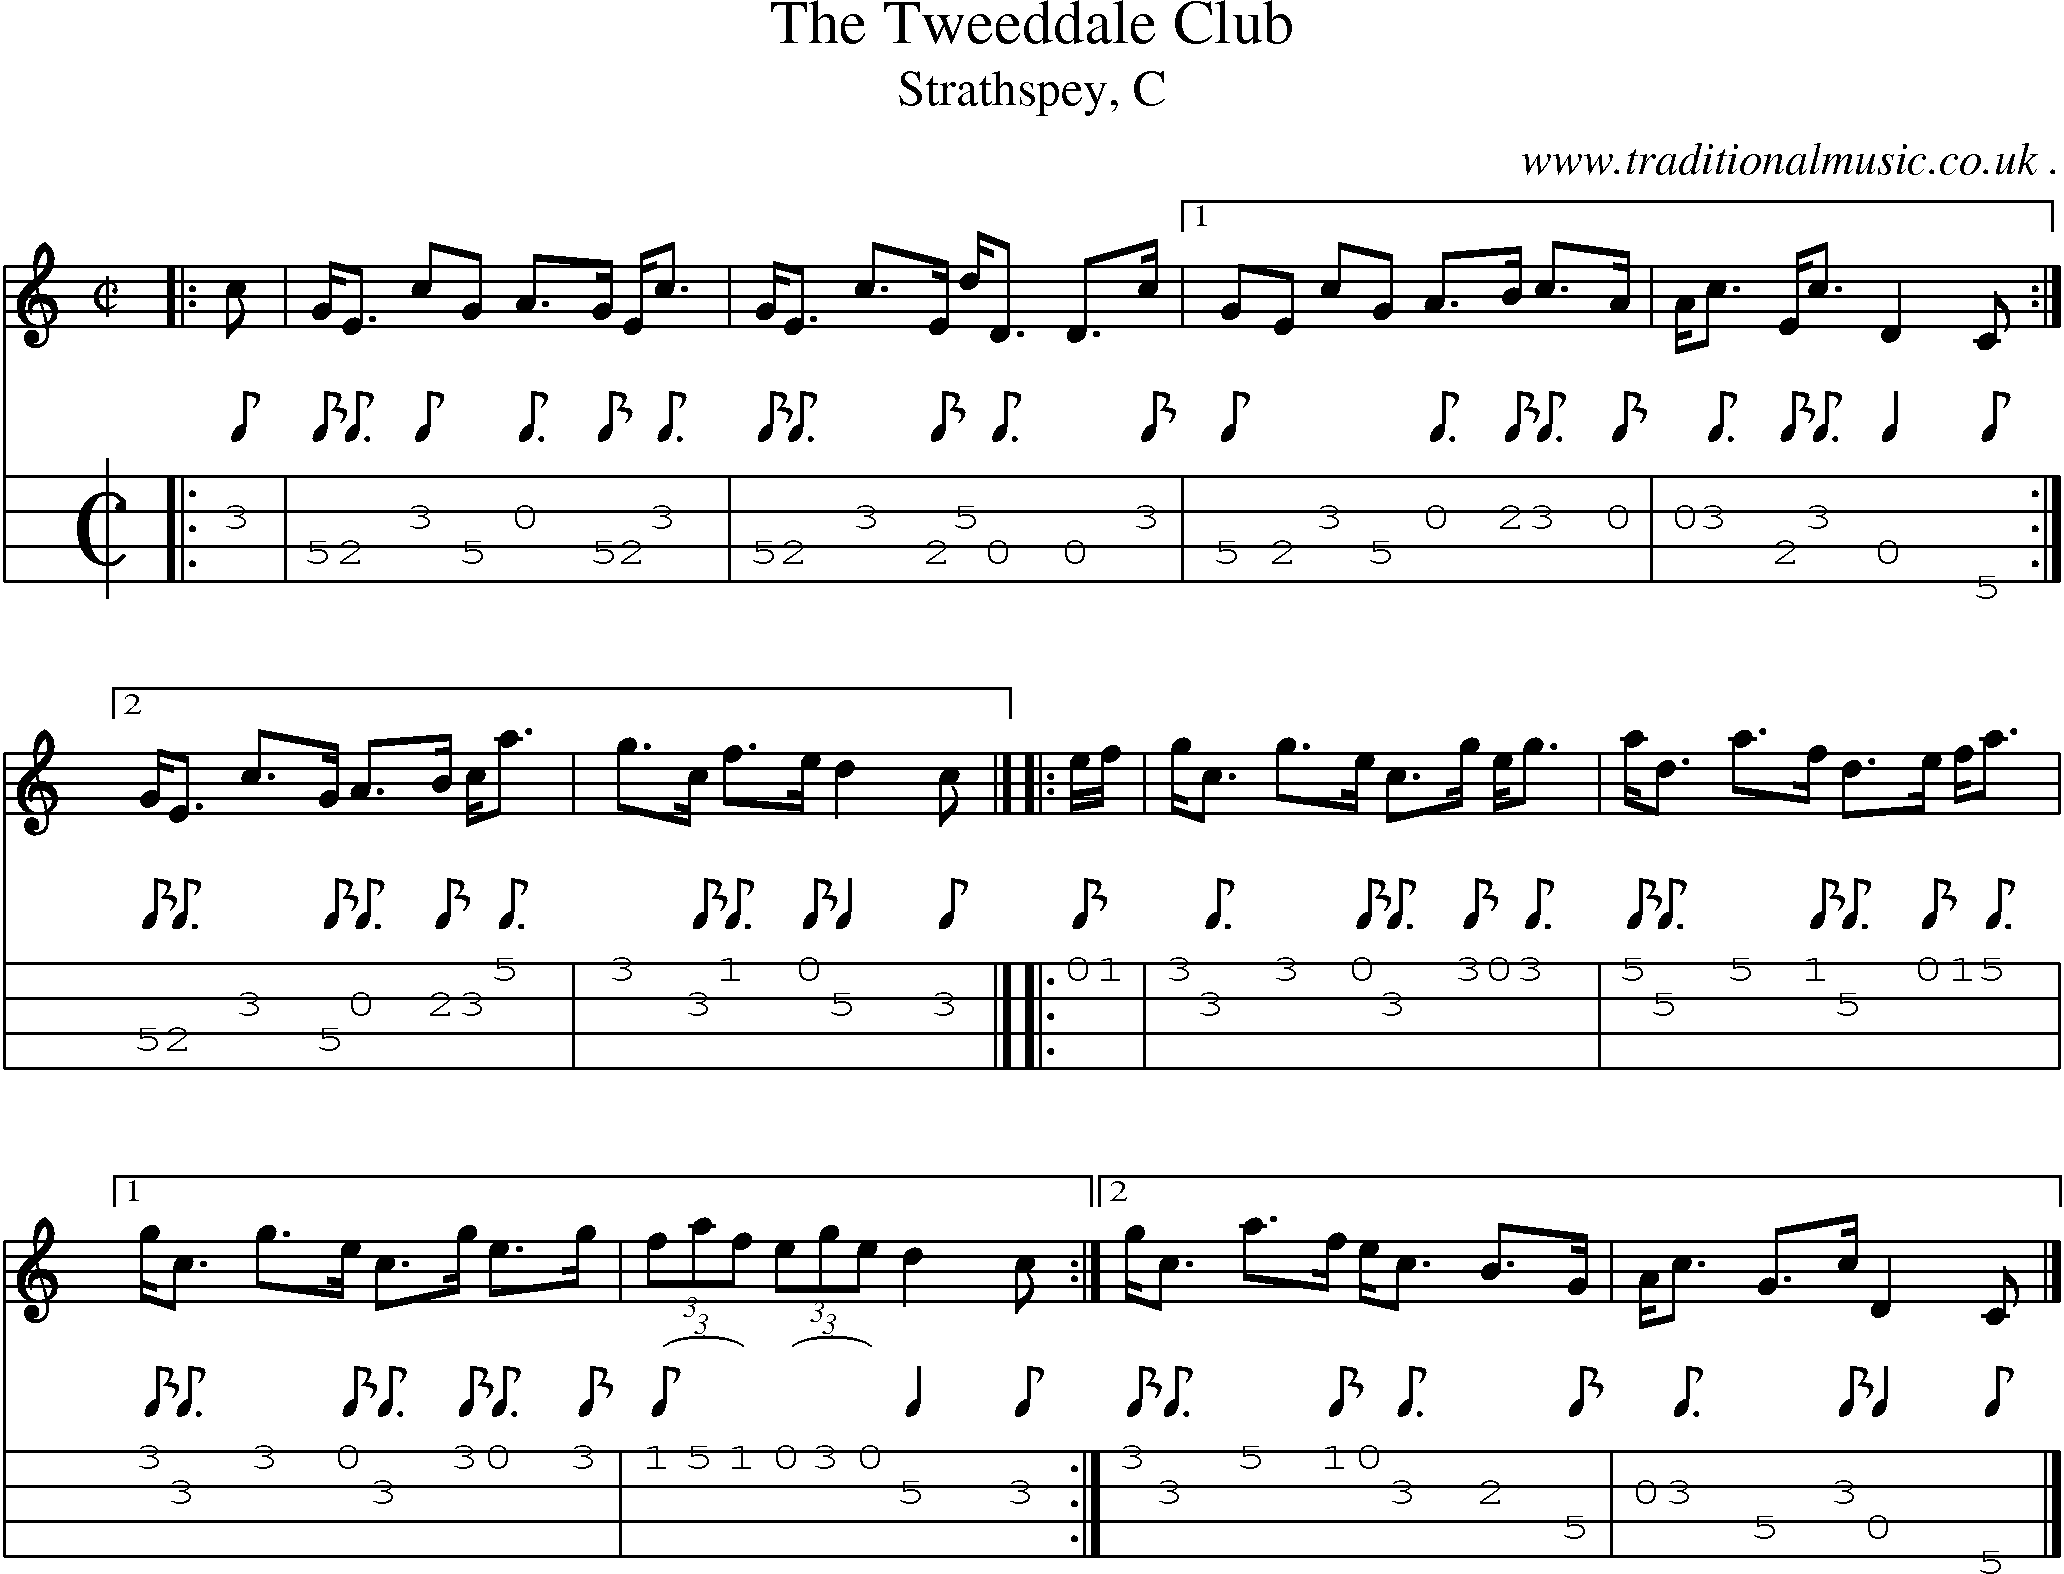 Sheet-music  score, Chords and Mandolin Tabs for The Tweeddale Club